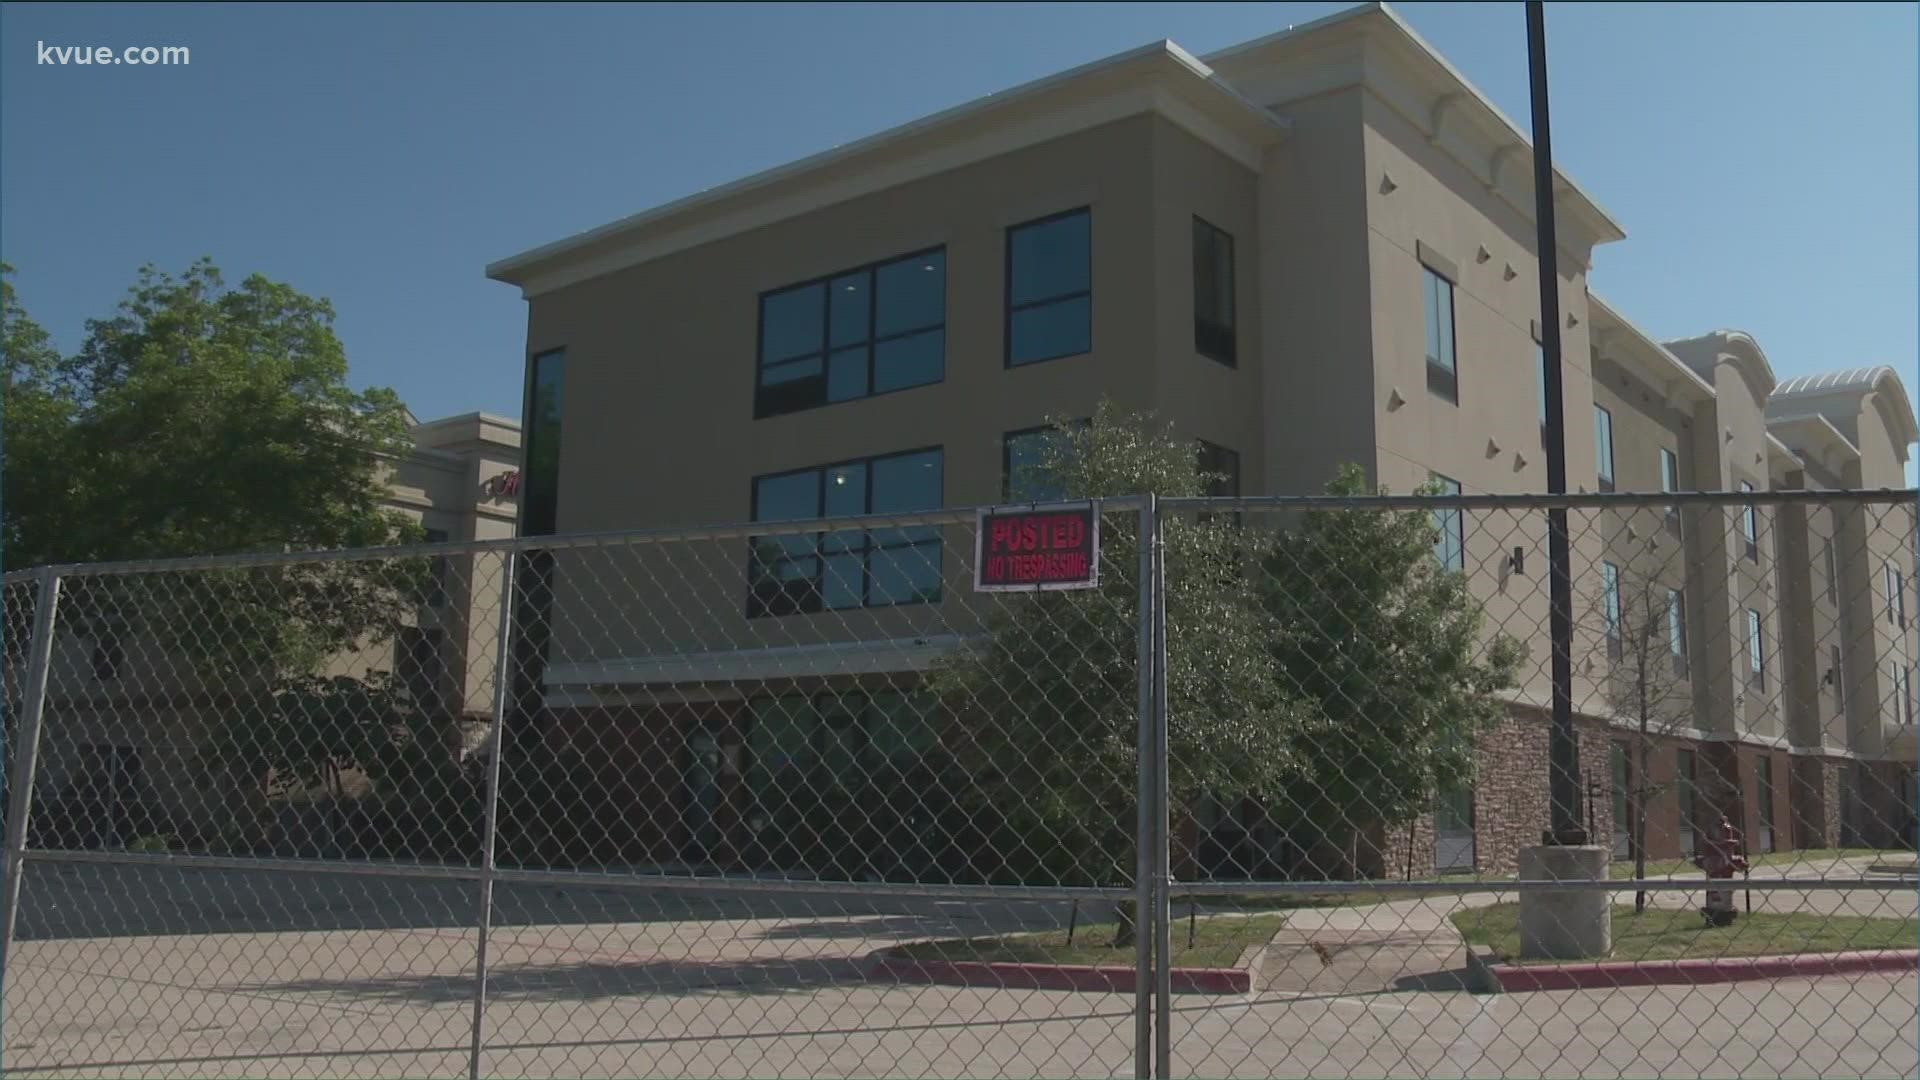 Austin Mayor Steve Adler joined KVUE Daybreak to discuss increased safety concerns around the hotel purchased to house people experiencing homelessness.